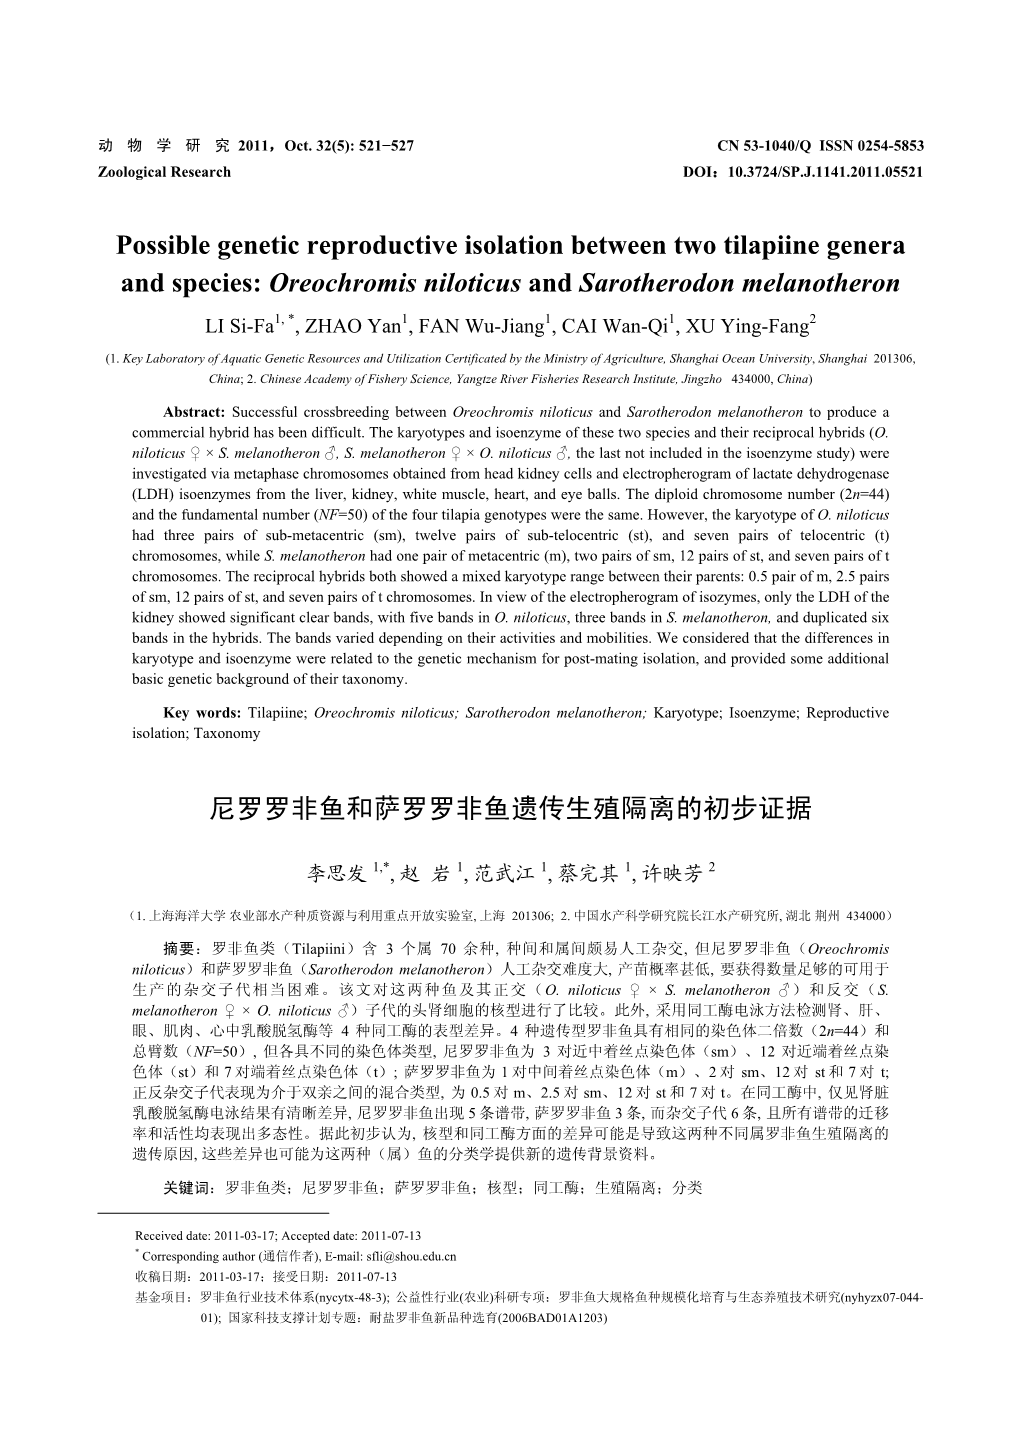 Possible Genetic Reproductive Isolation Between Two Tilapiine Genera and Species: Oreochromis Niloticus and Sarotherodon Melanot